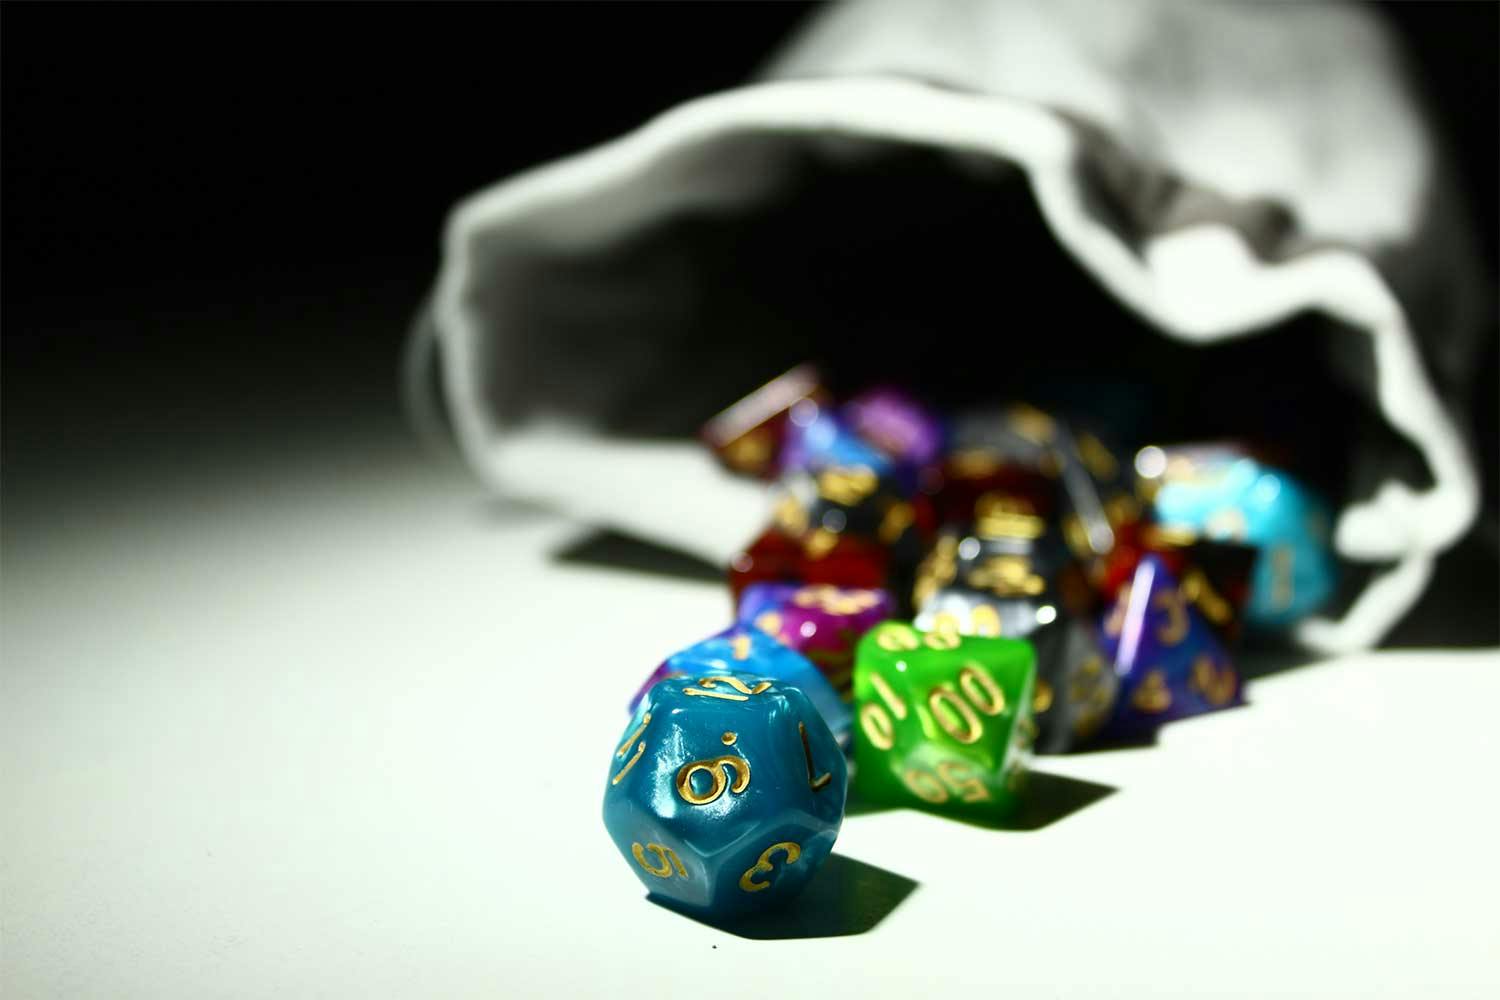 Several multi-sided game dice spill out of a grey cloth bag onto a white tabletop.